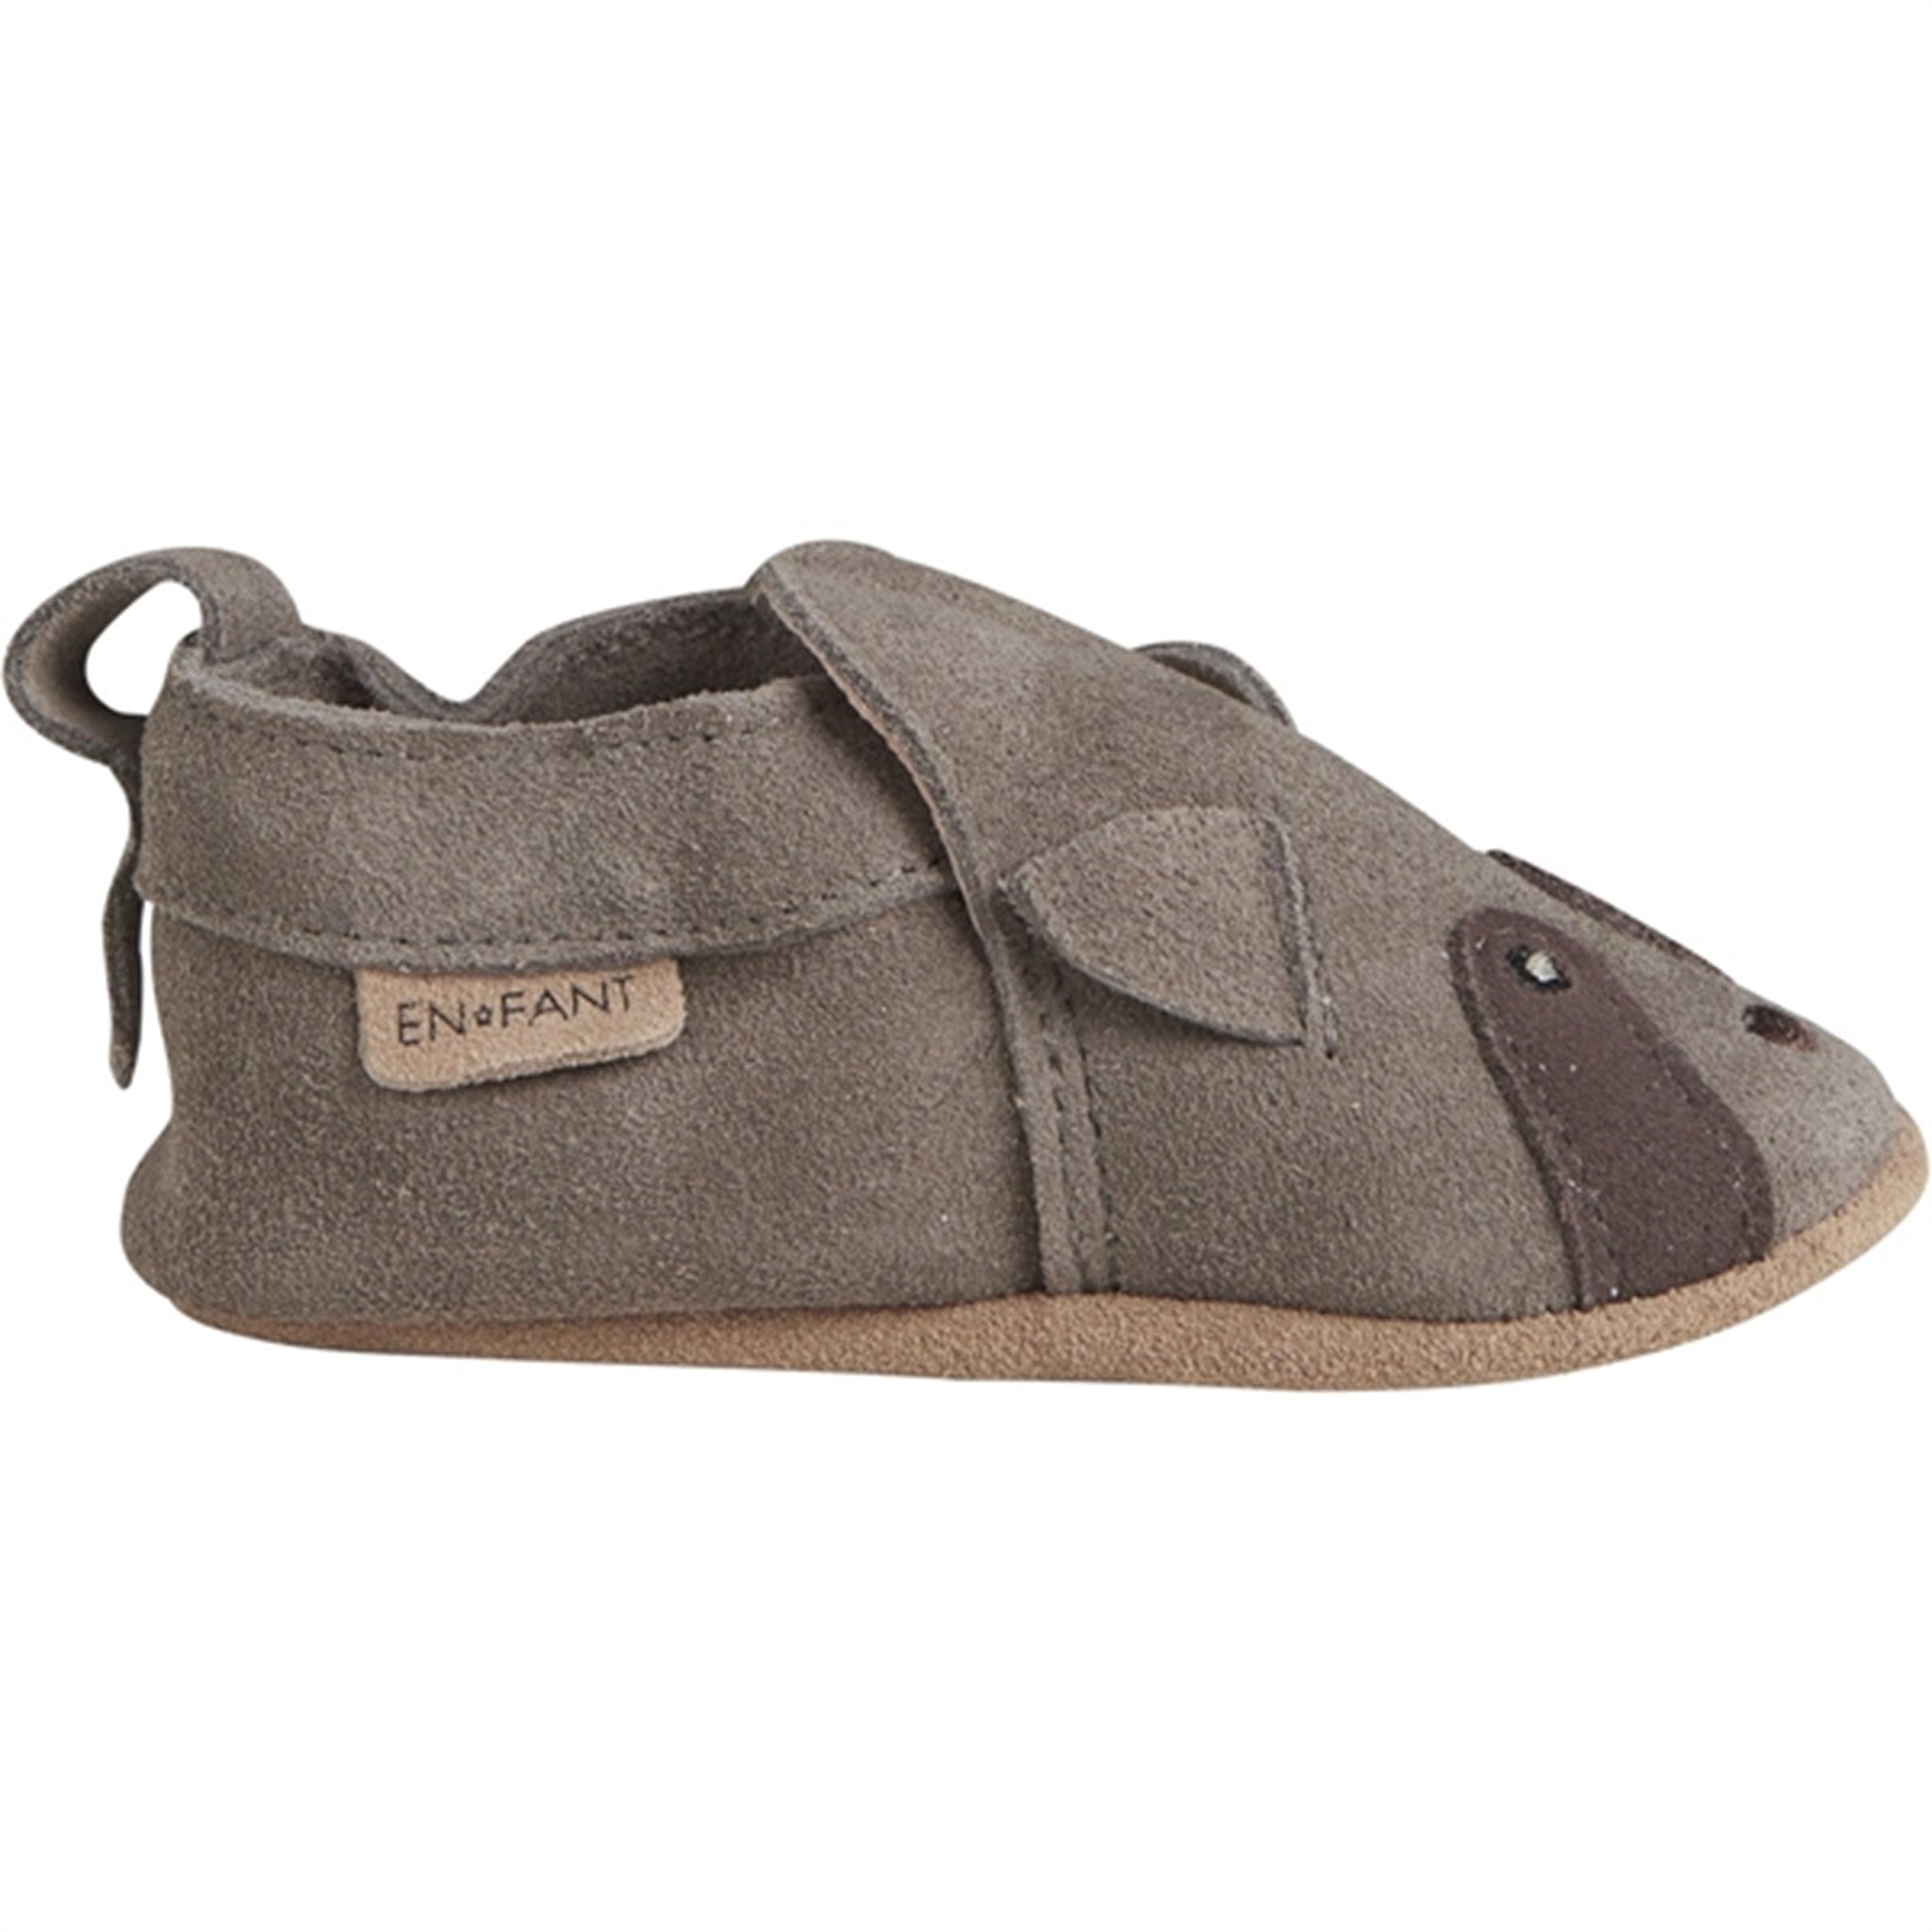 En Fant Slippers Ruskind Chocolate Chip 3